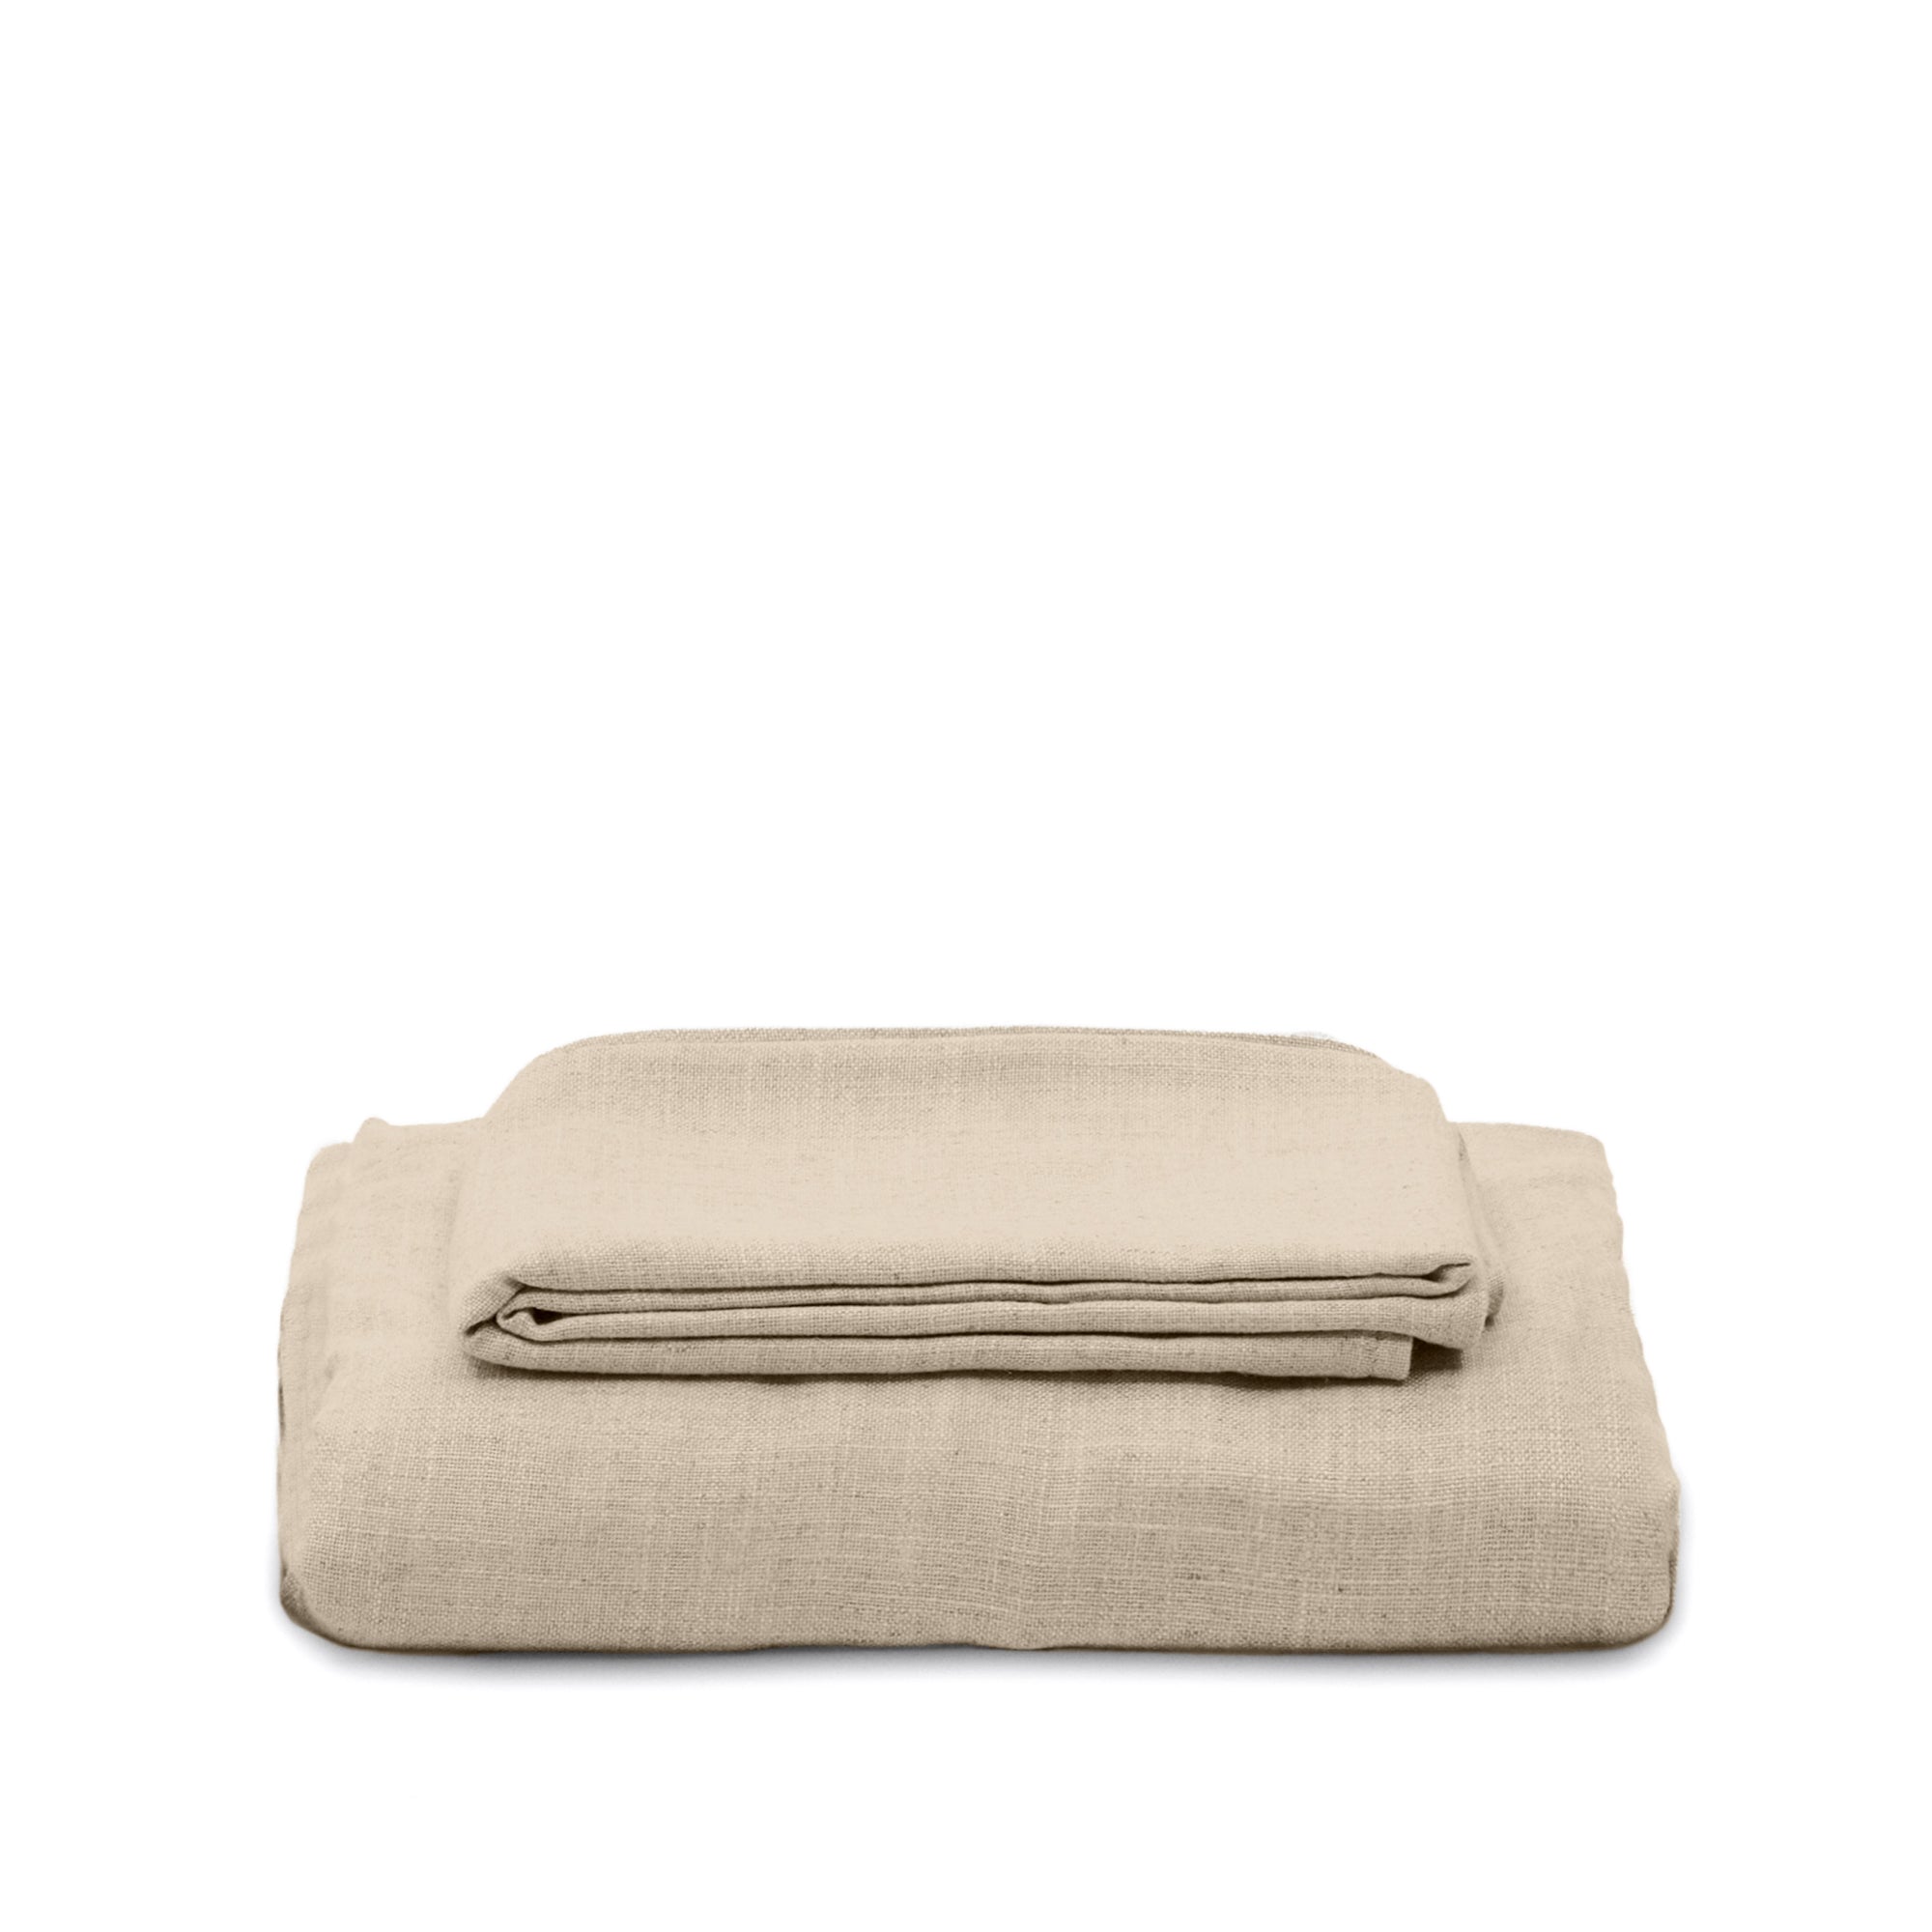 Nora armchair cover in beige linen and cotton fabric 140 cm